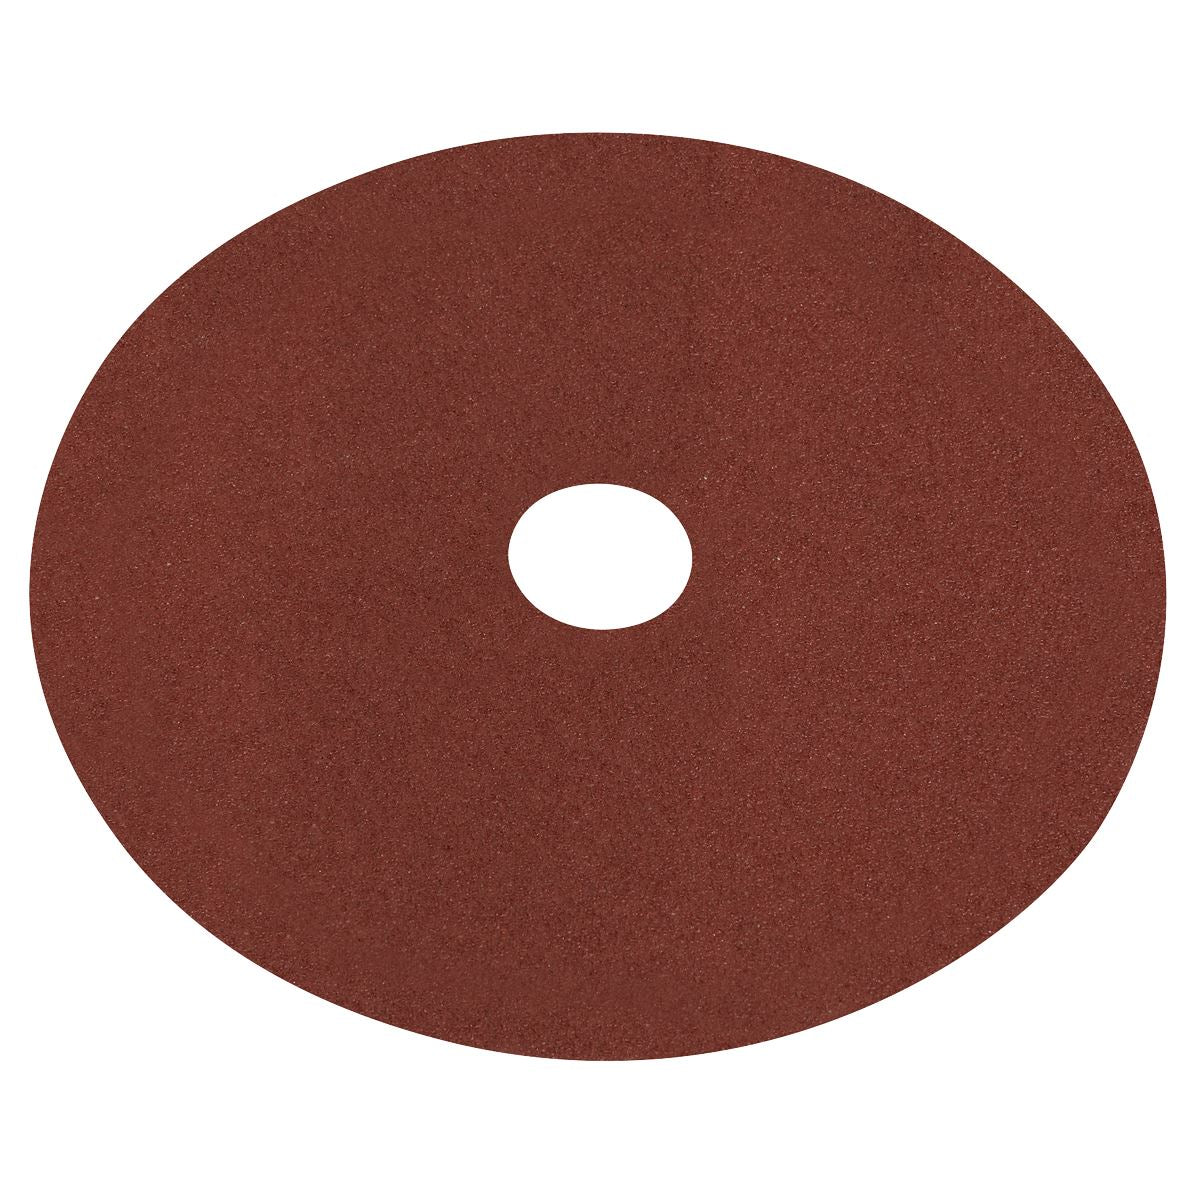 Worksafe by Sealey Fibre Backed Disc Ø115mm - 60Grit Pack of 25